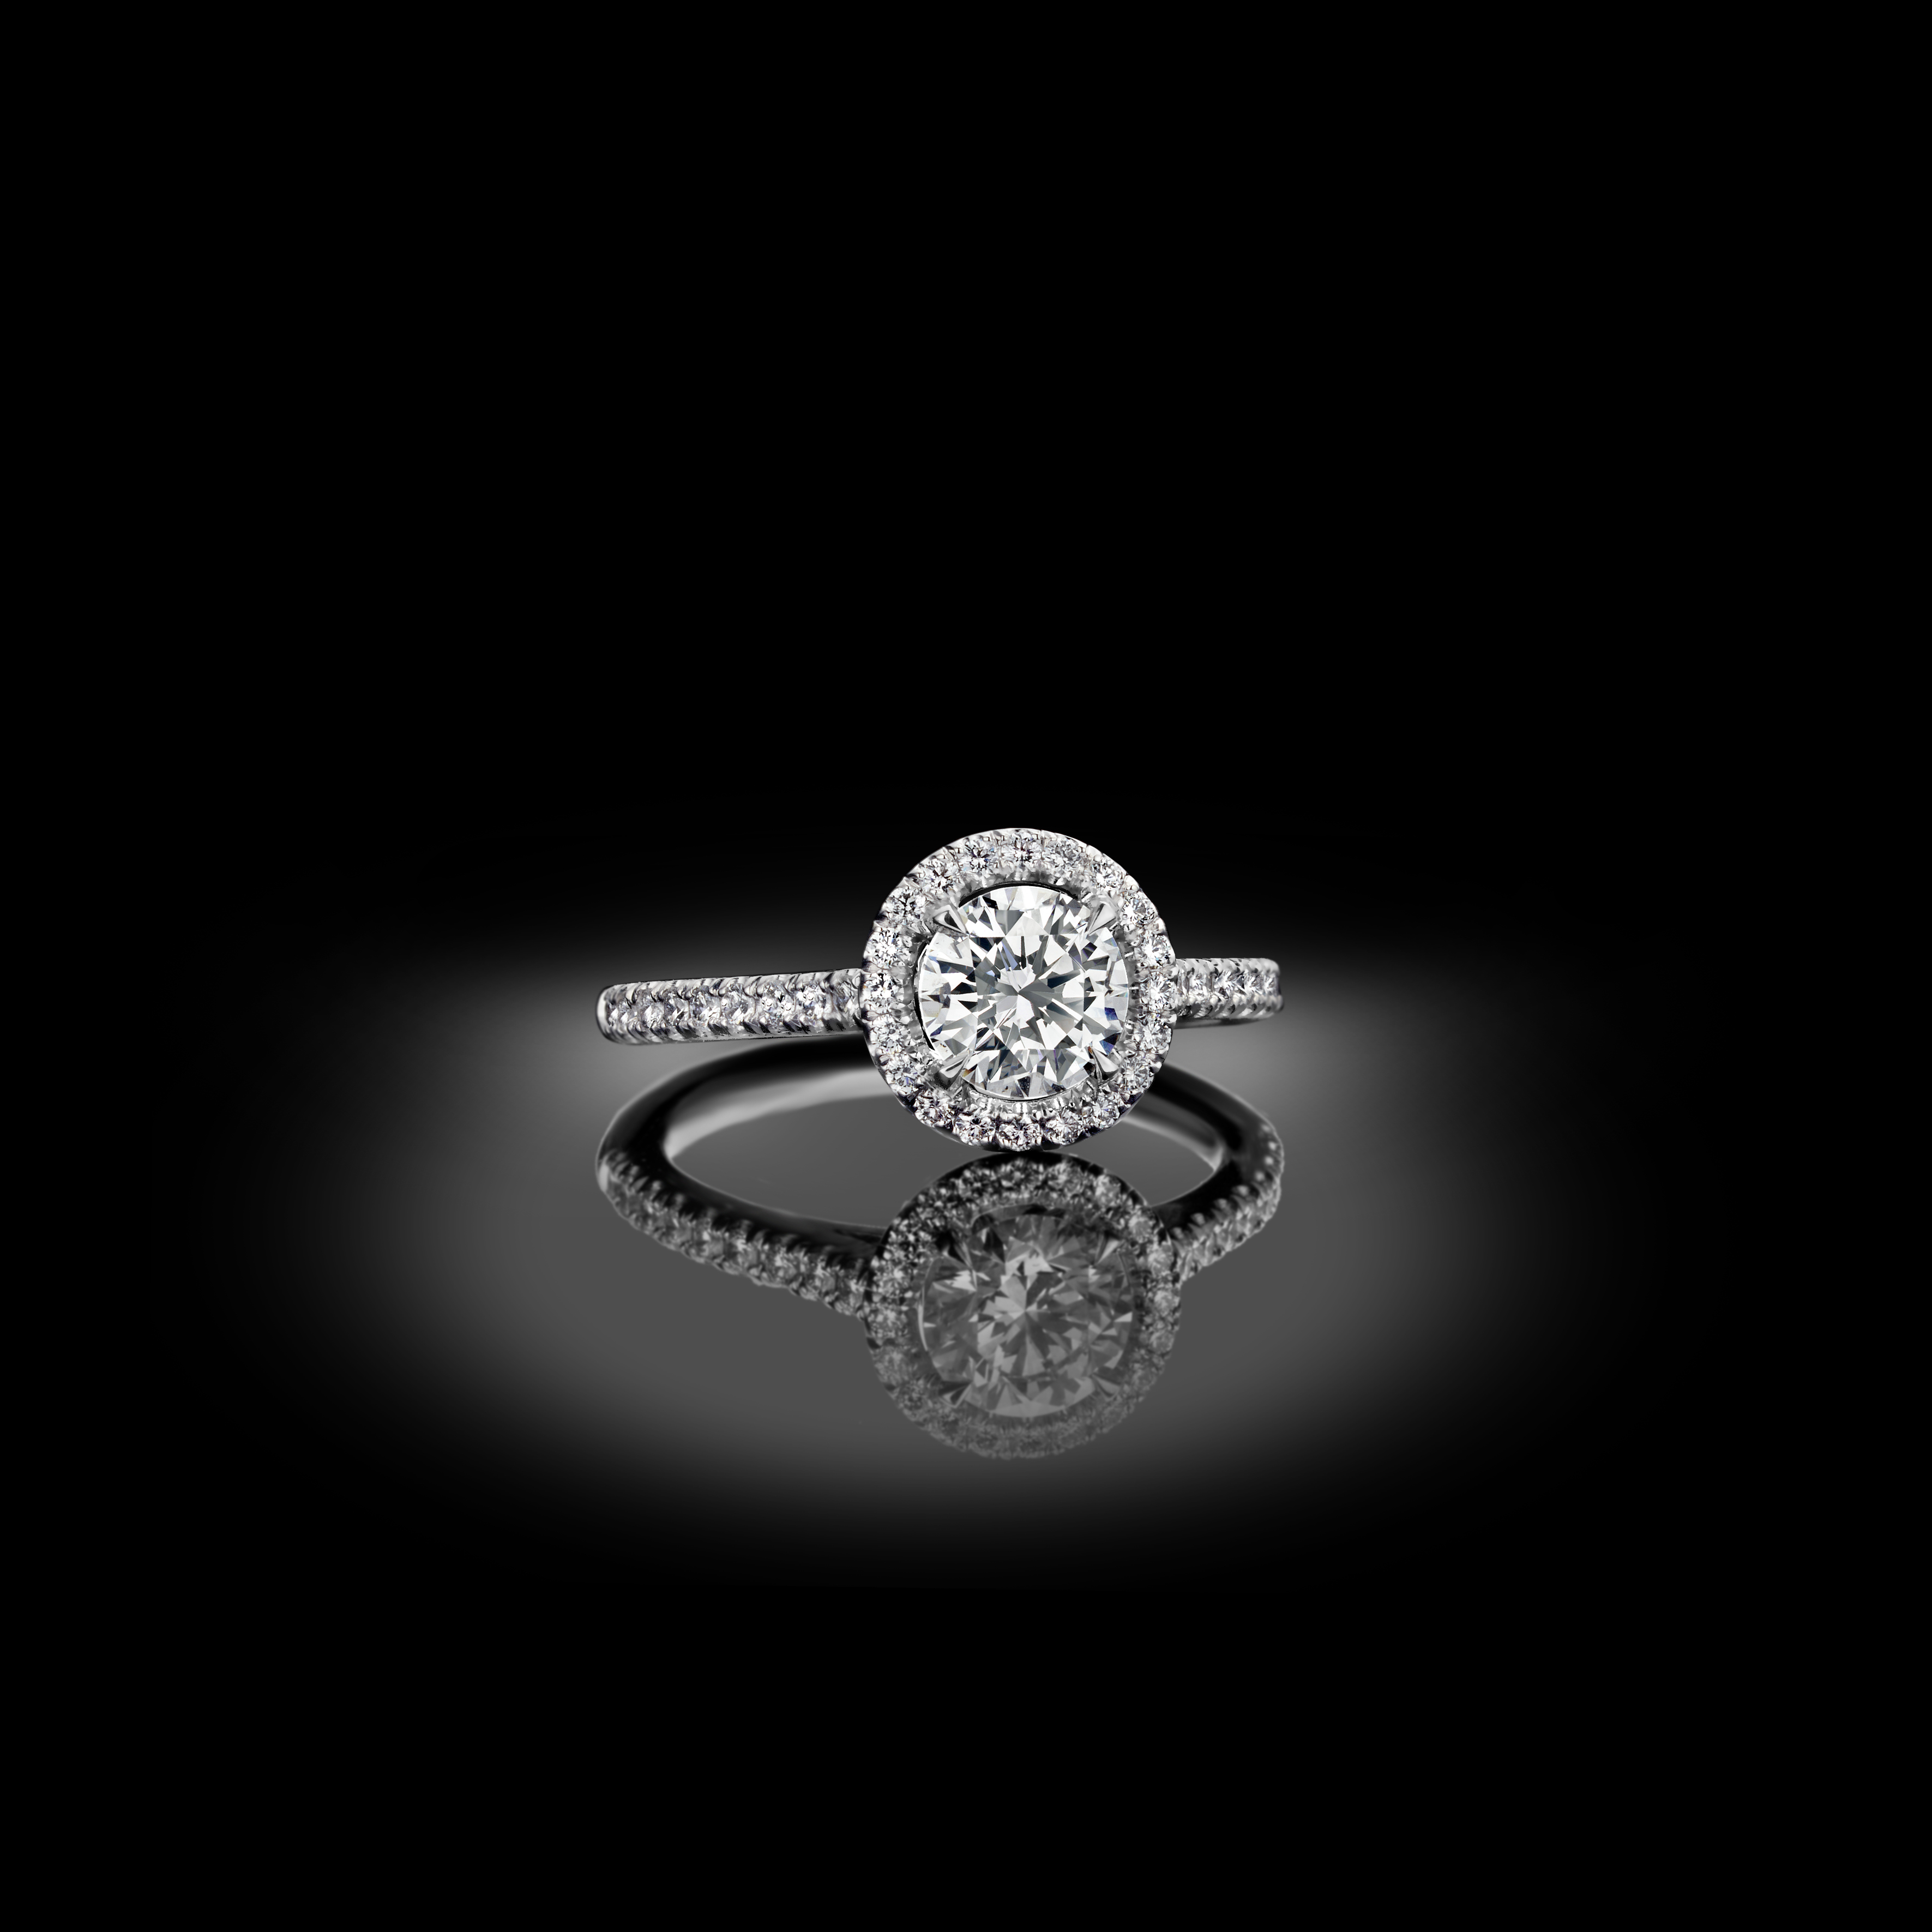 Classic and elegant, timeless halo engagement ring.